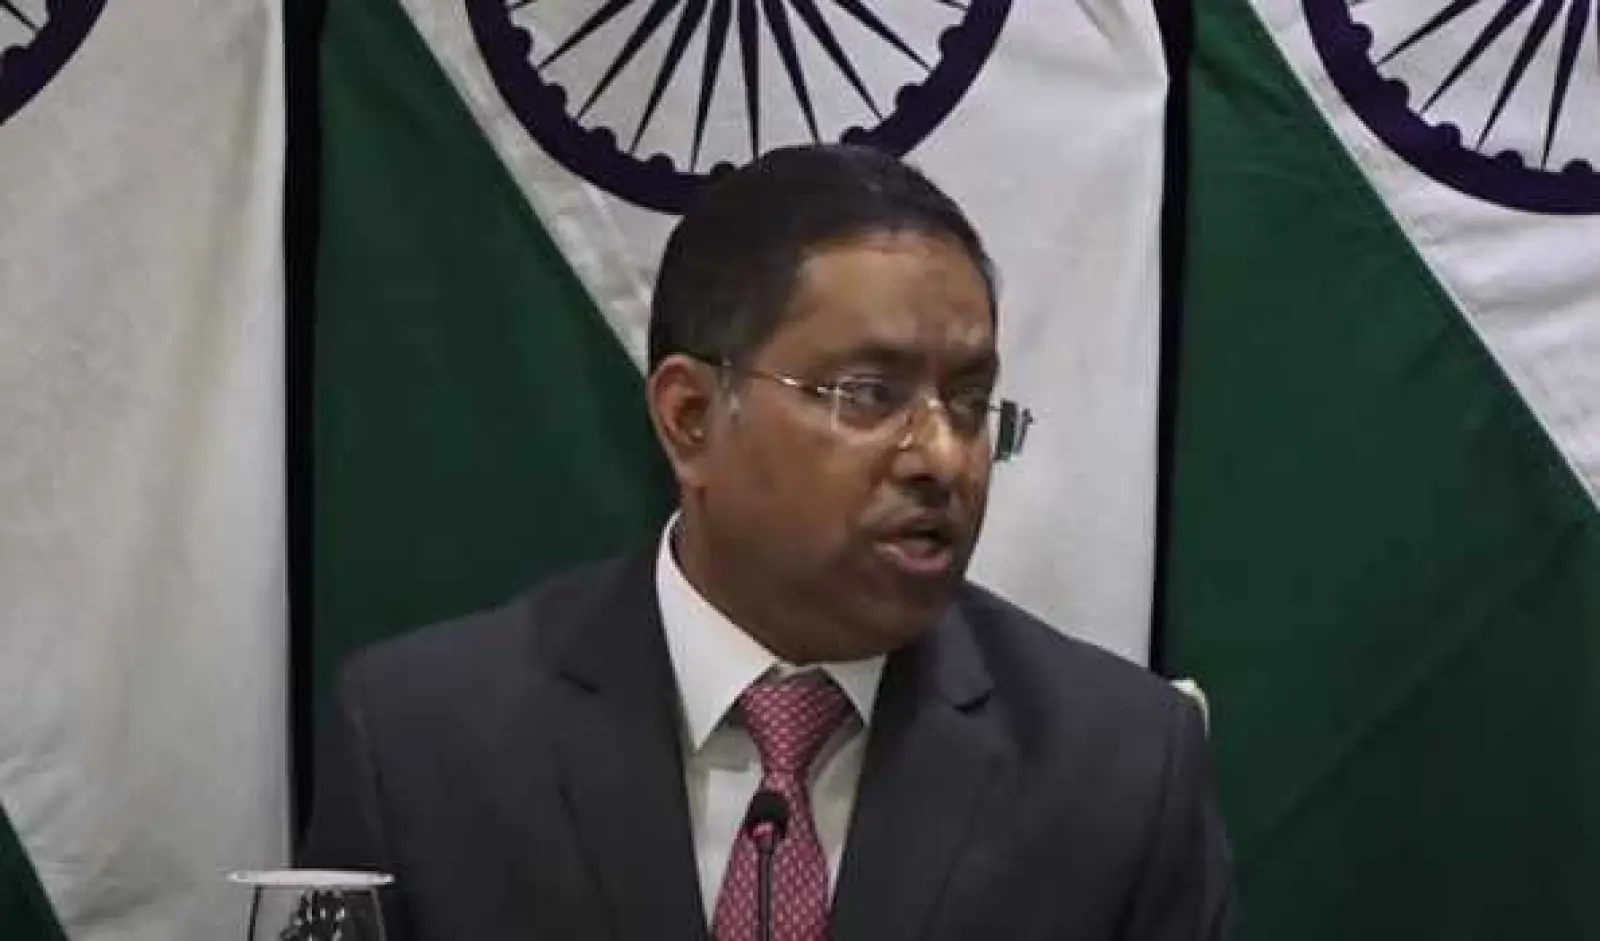 MEA: Important discussion on cross-border terrorism between India and Kazakhstan; India alert on the safety of Indians in Israel